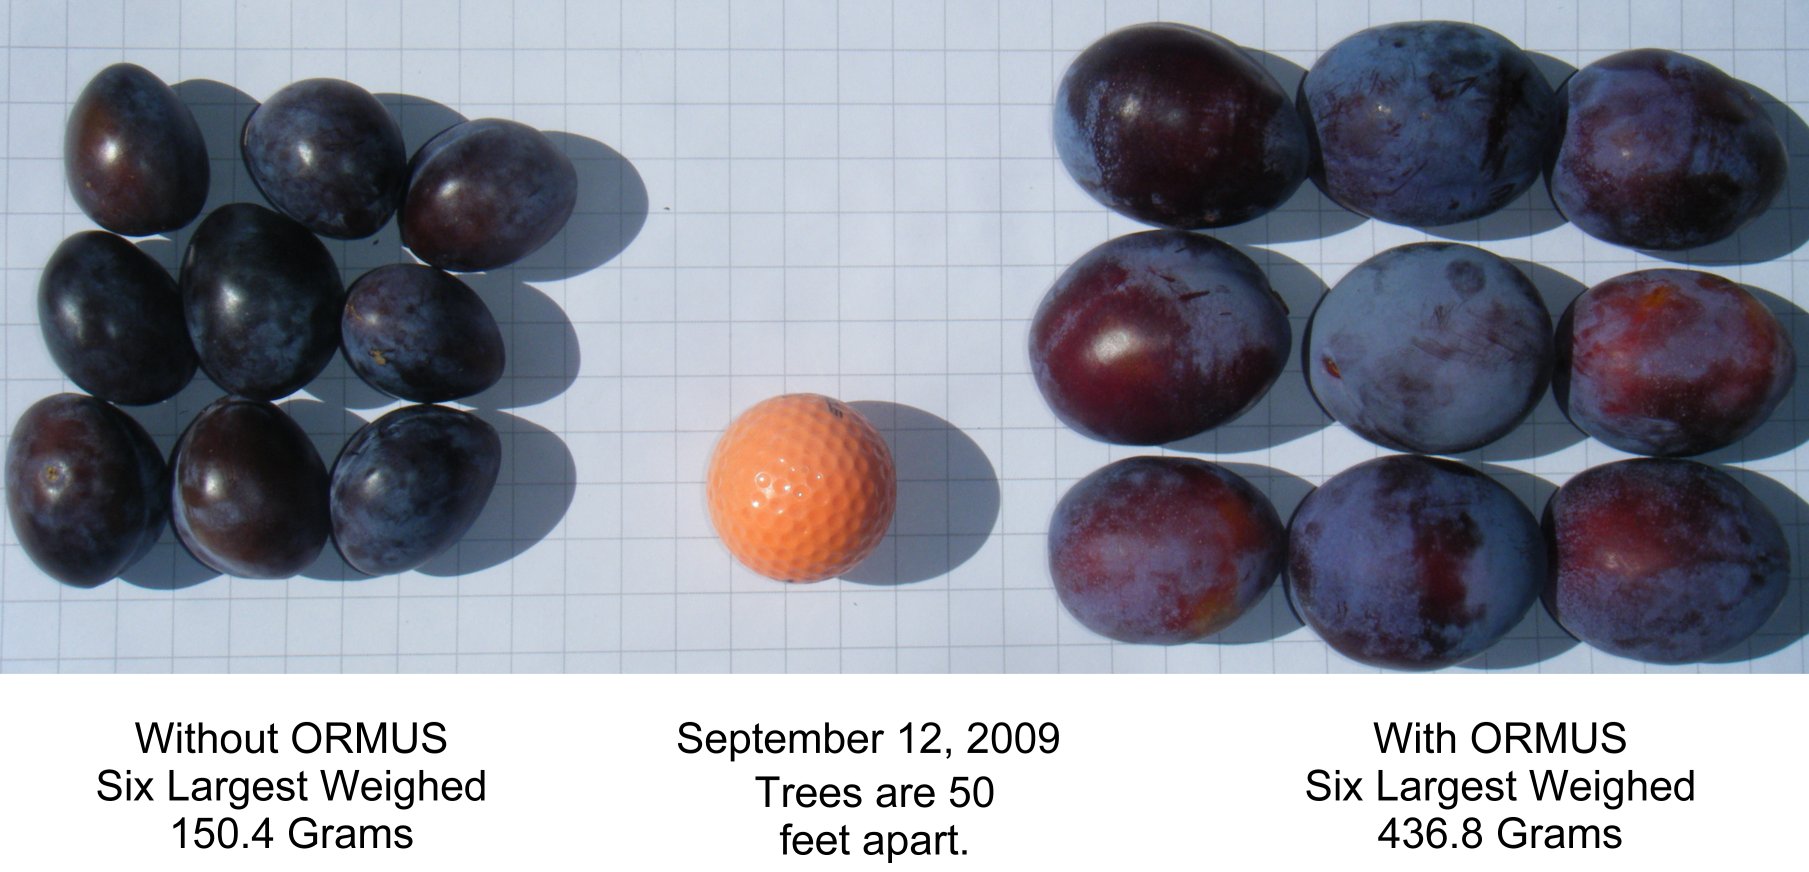 2009 Plums compared